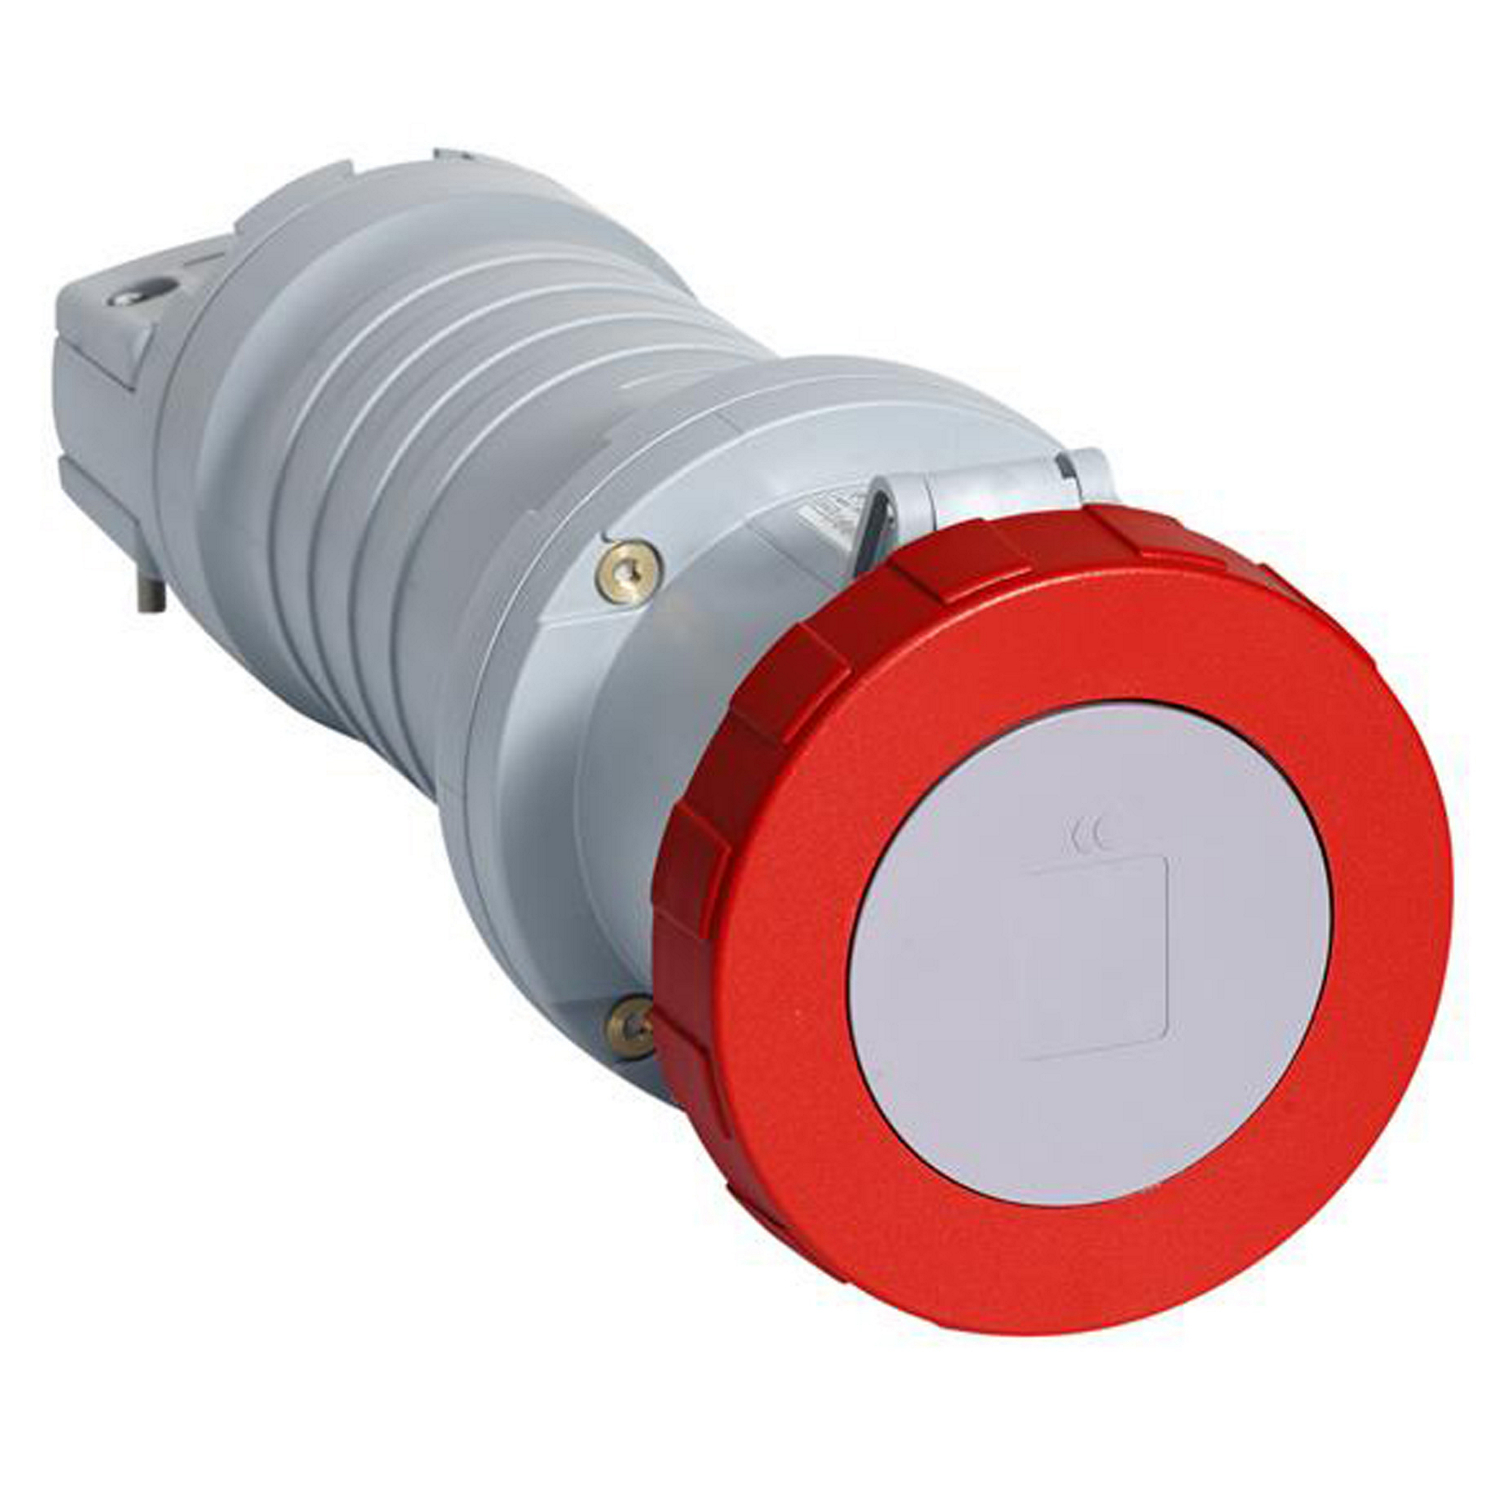 ABB ABB560C9W Pin and Sleeve Connector